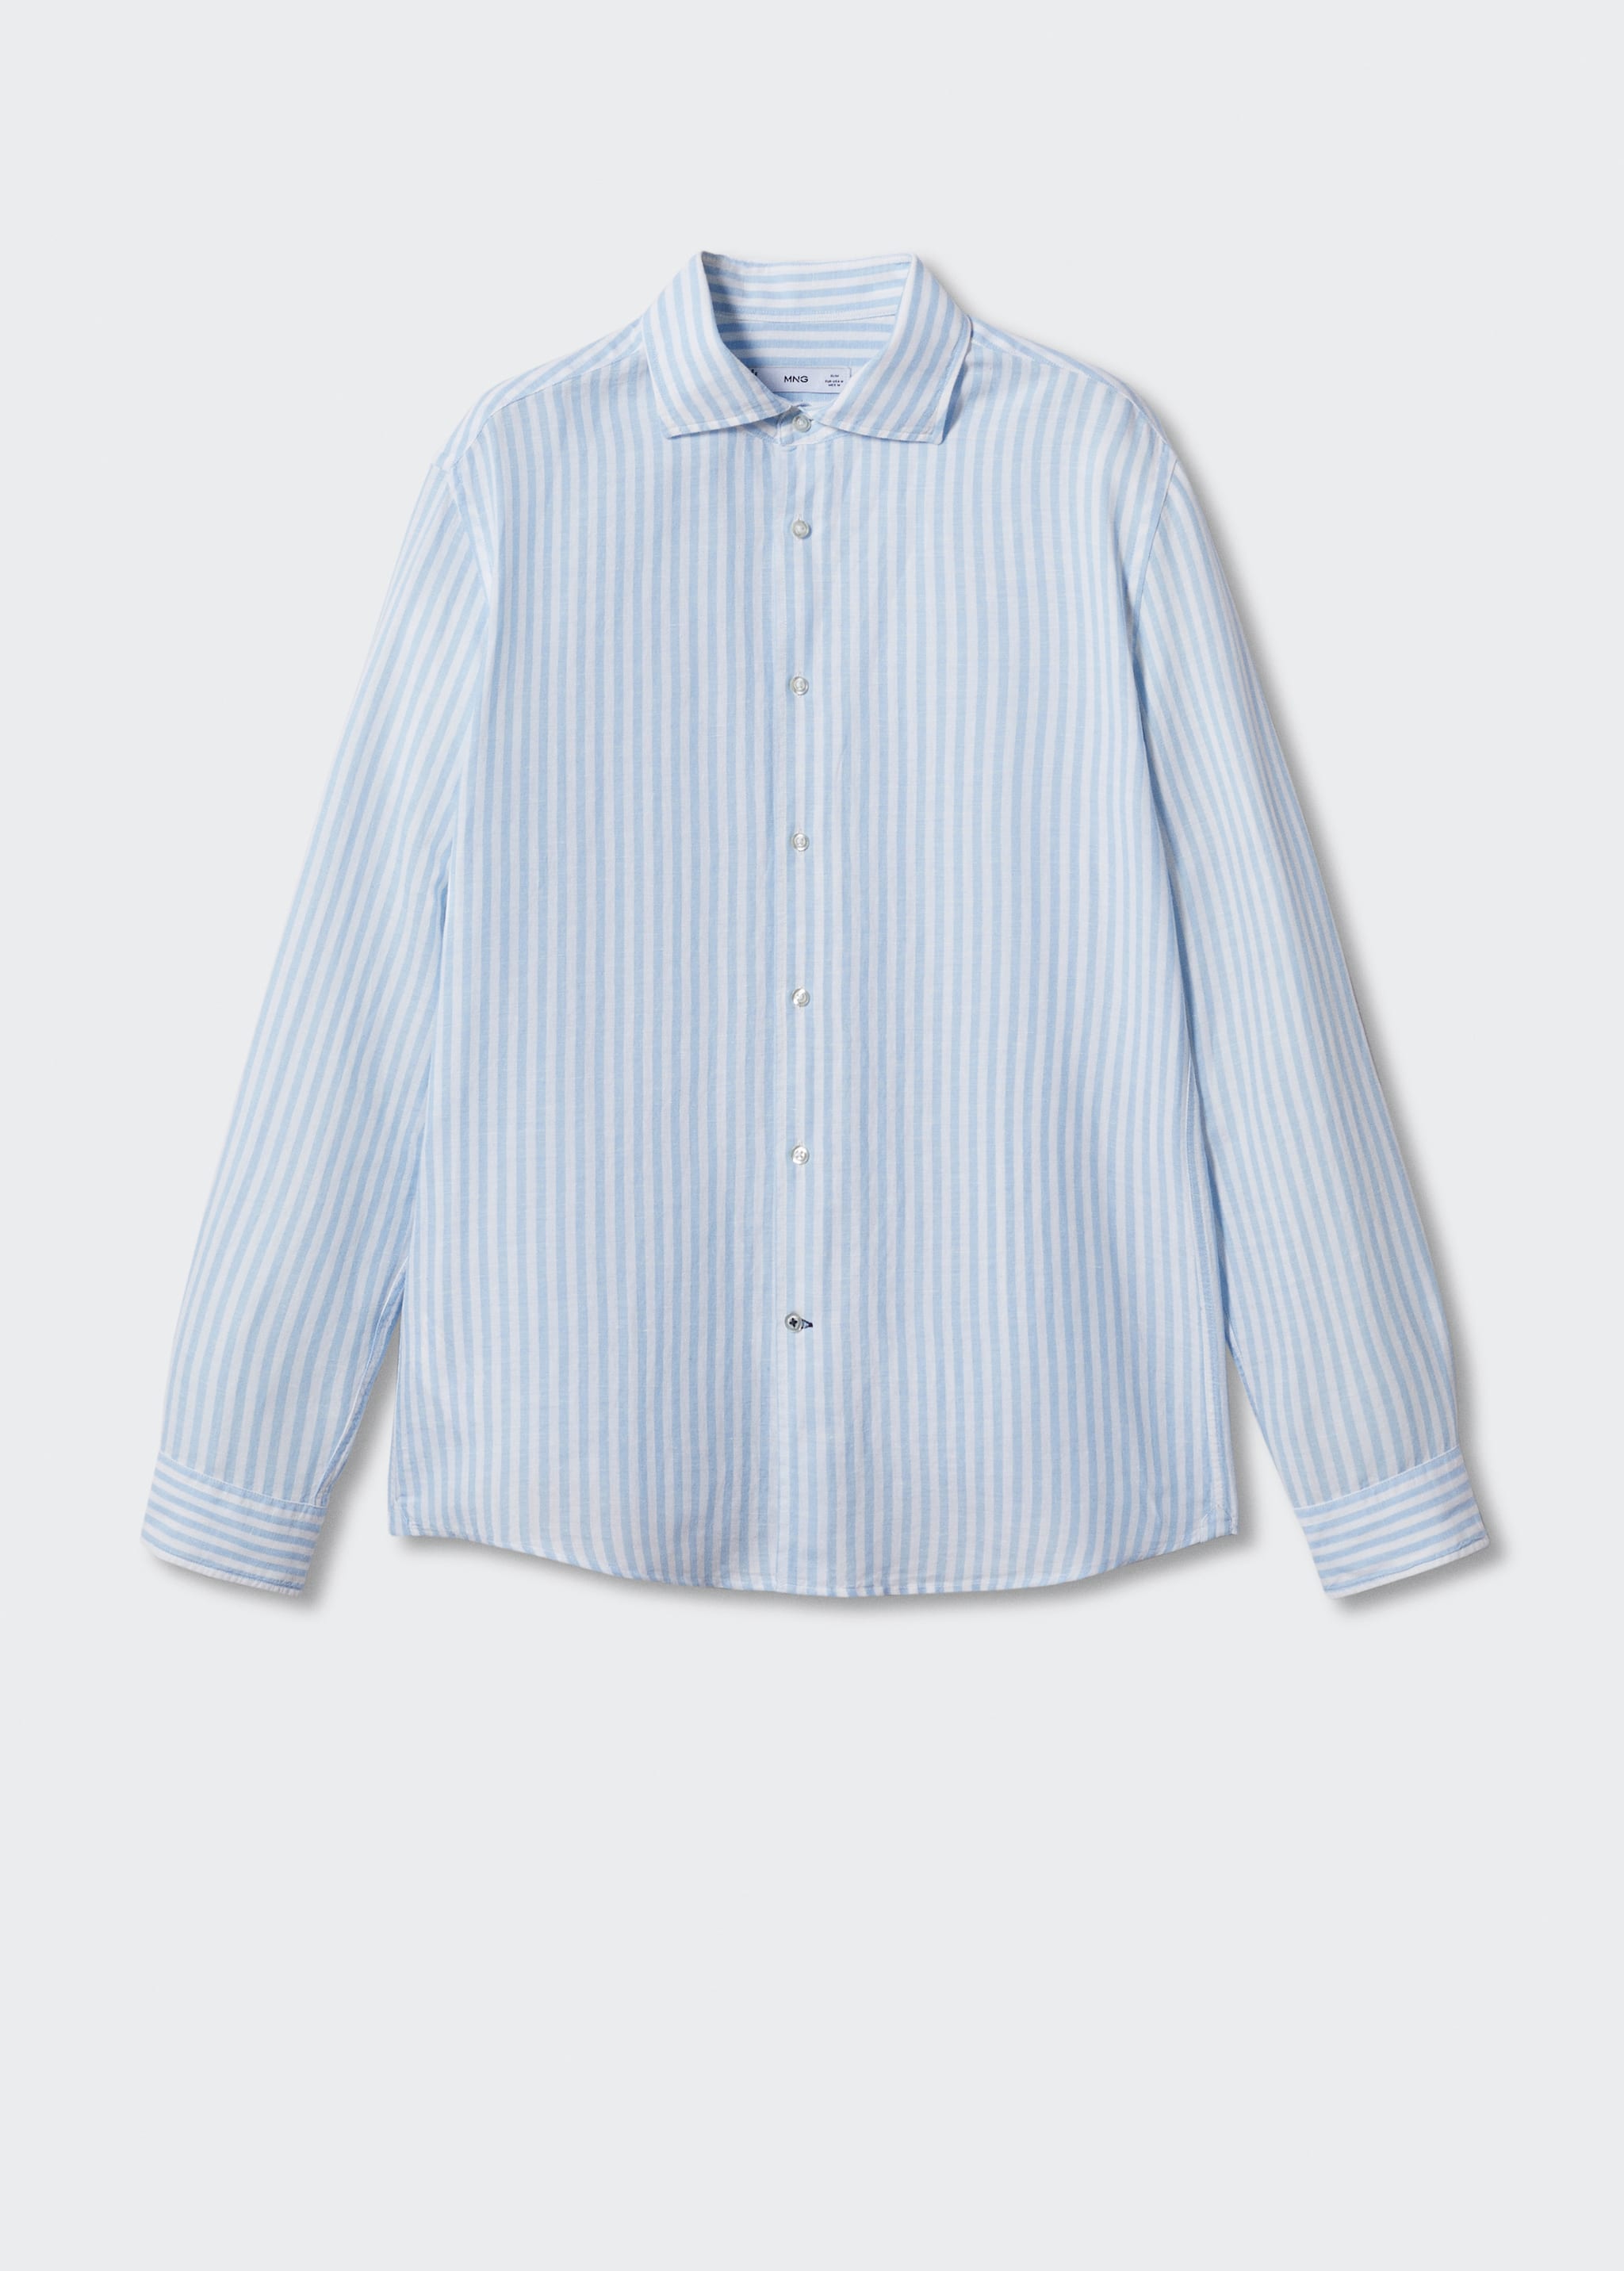 Slim fit striped linen shirt - Article without model